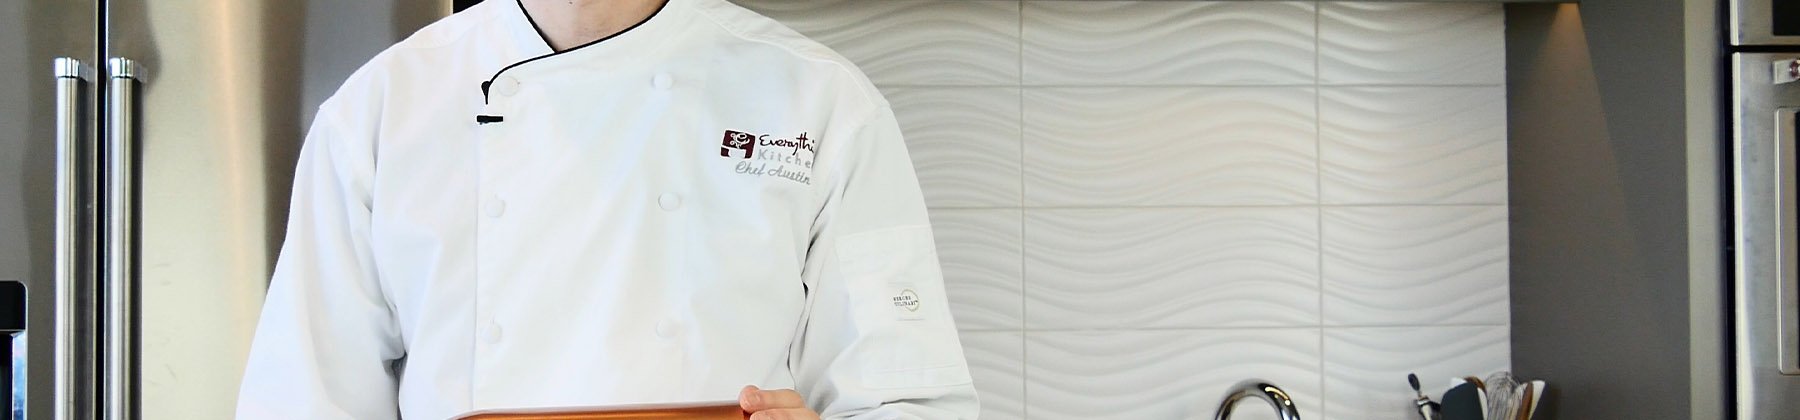 Photo of commercial chef apparel.